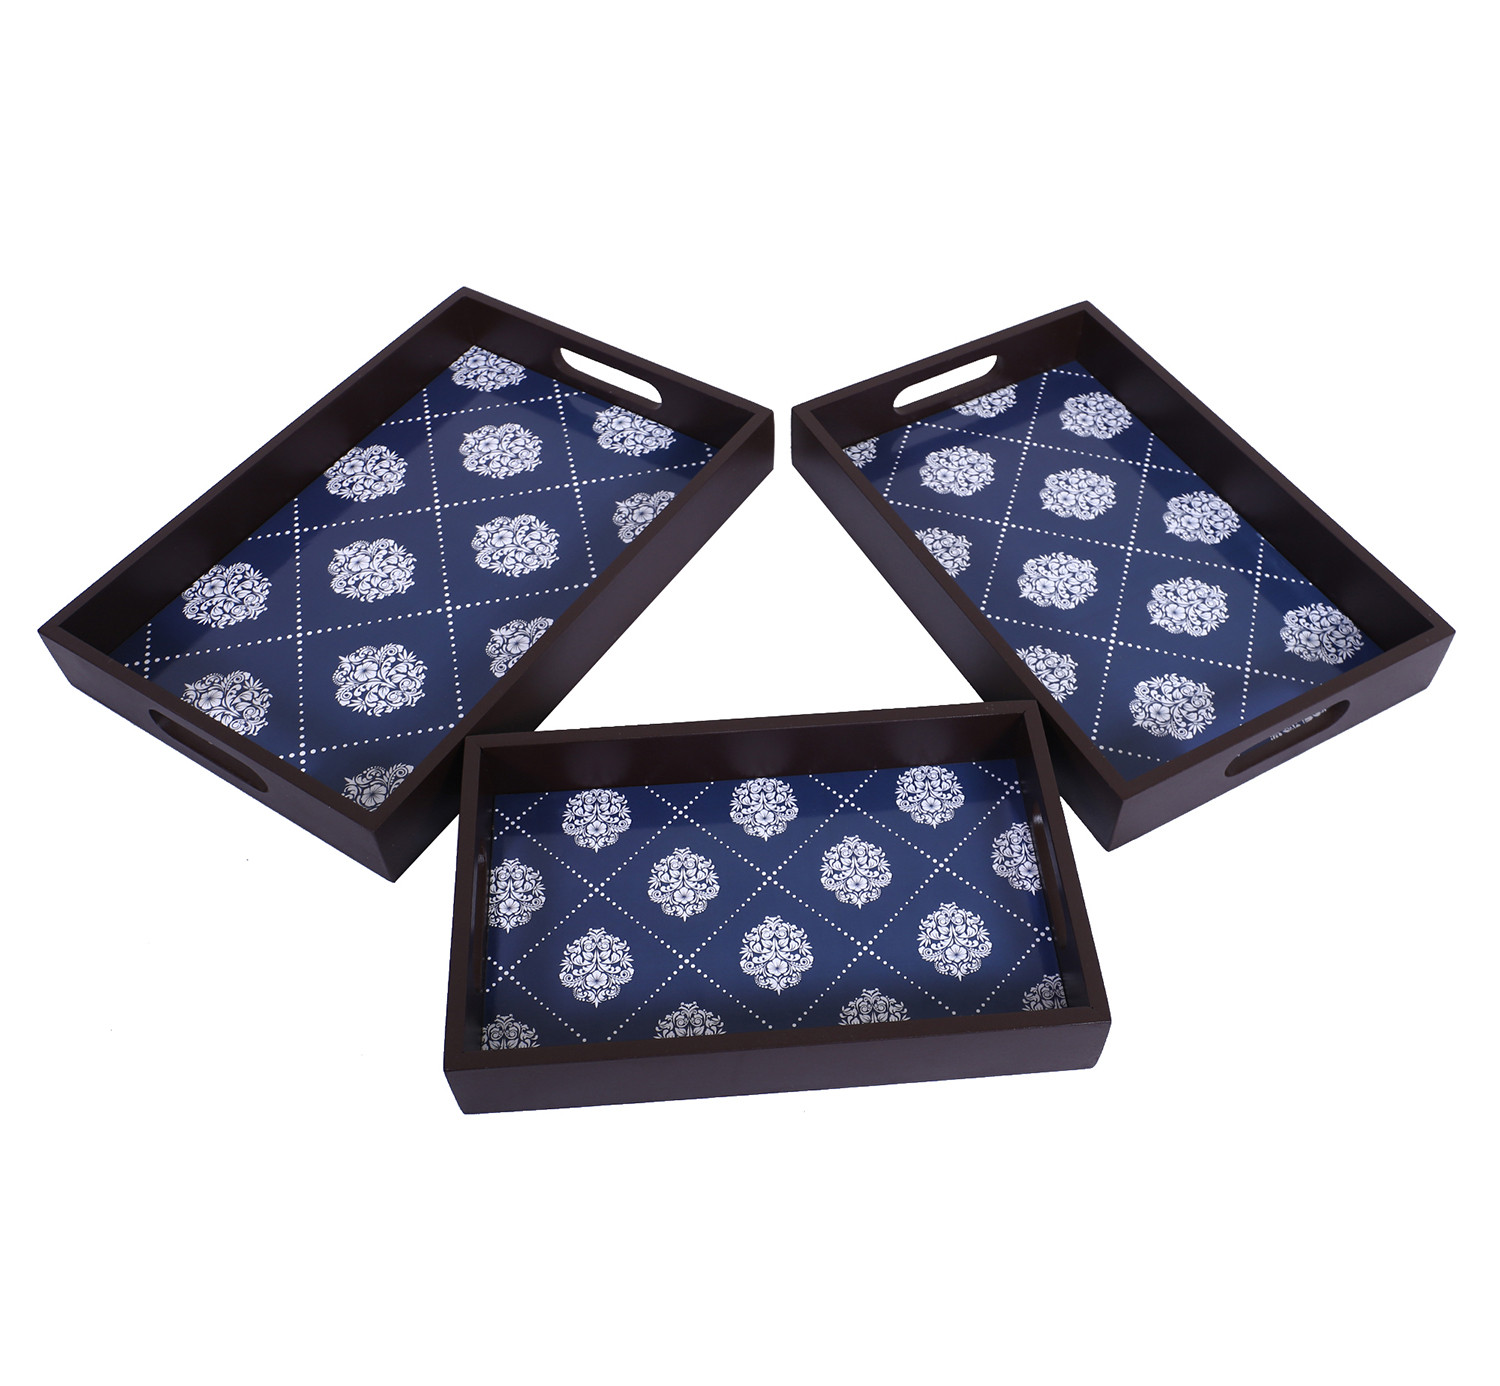 Kuber Industries Nested Serving Trays|Wooden Damask Blue Design Farmhouse Platter|Rectangular Shape Coffee Table Trays with Handle for Kitchen,Dining Area,Set of 3 (Brown)